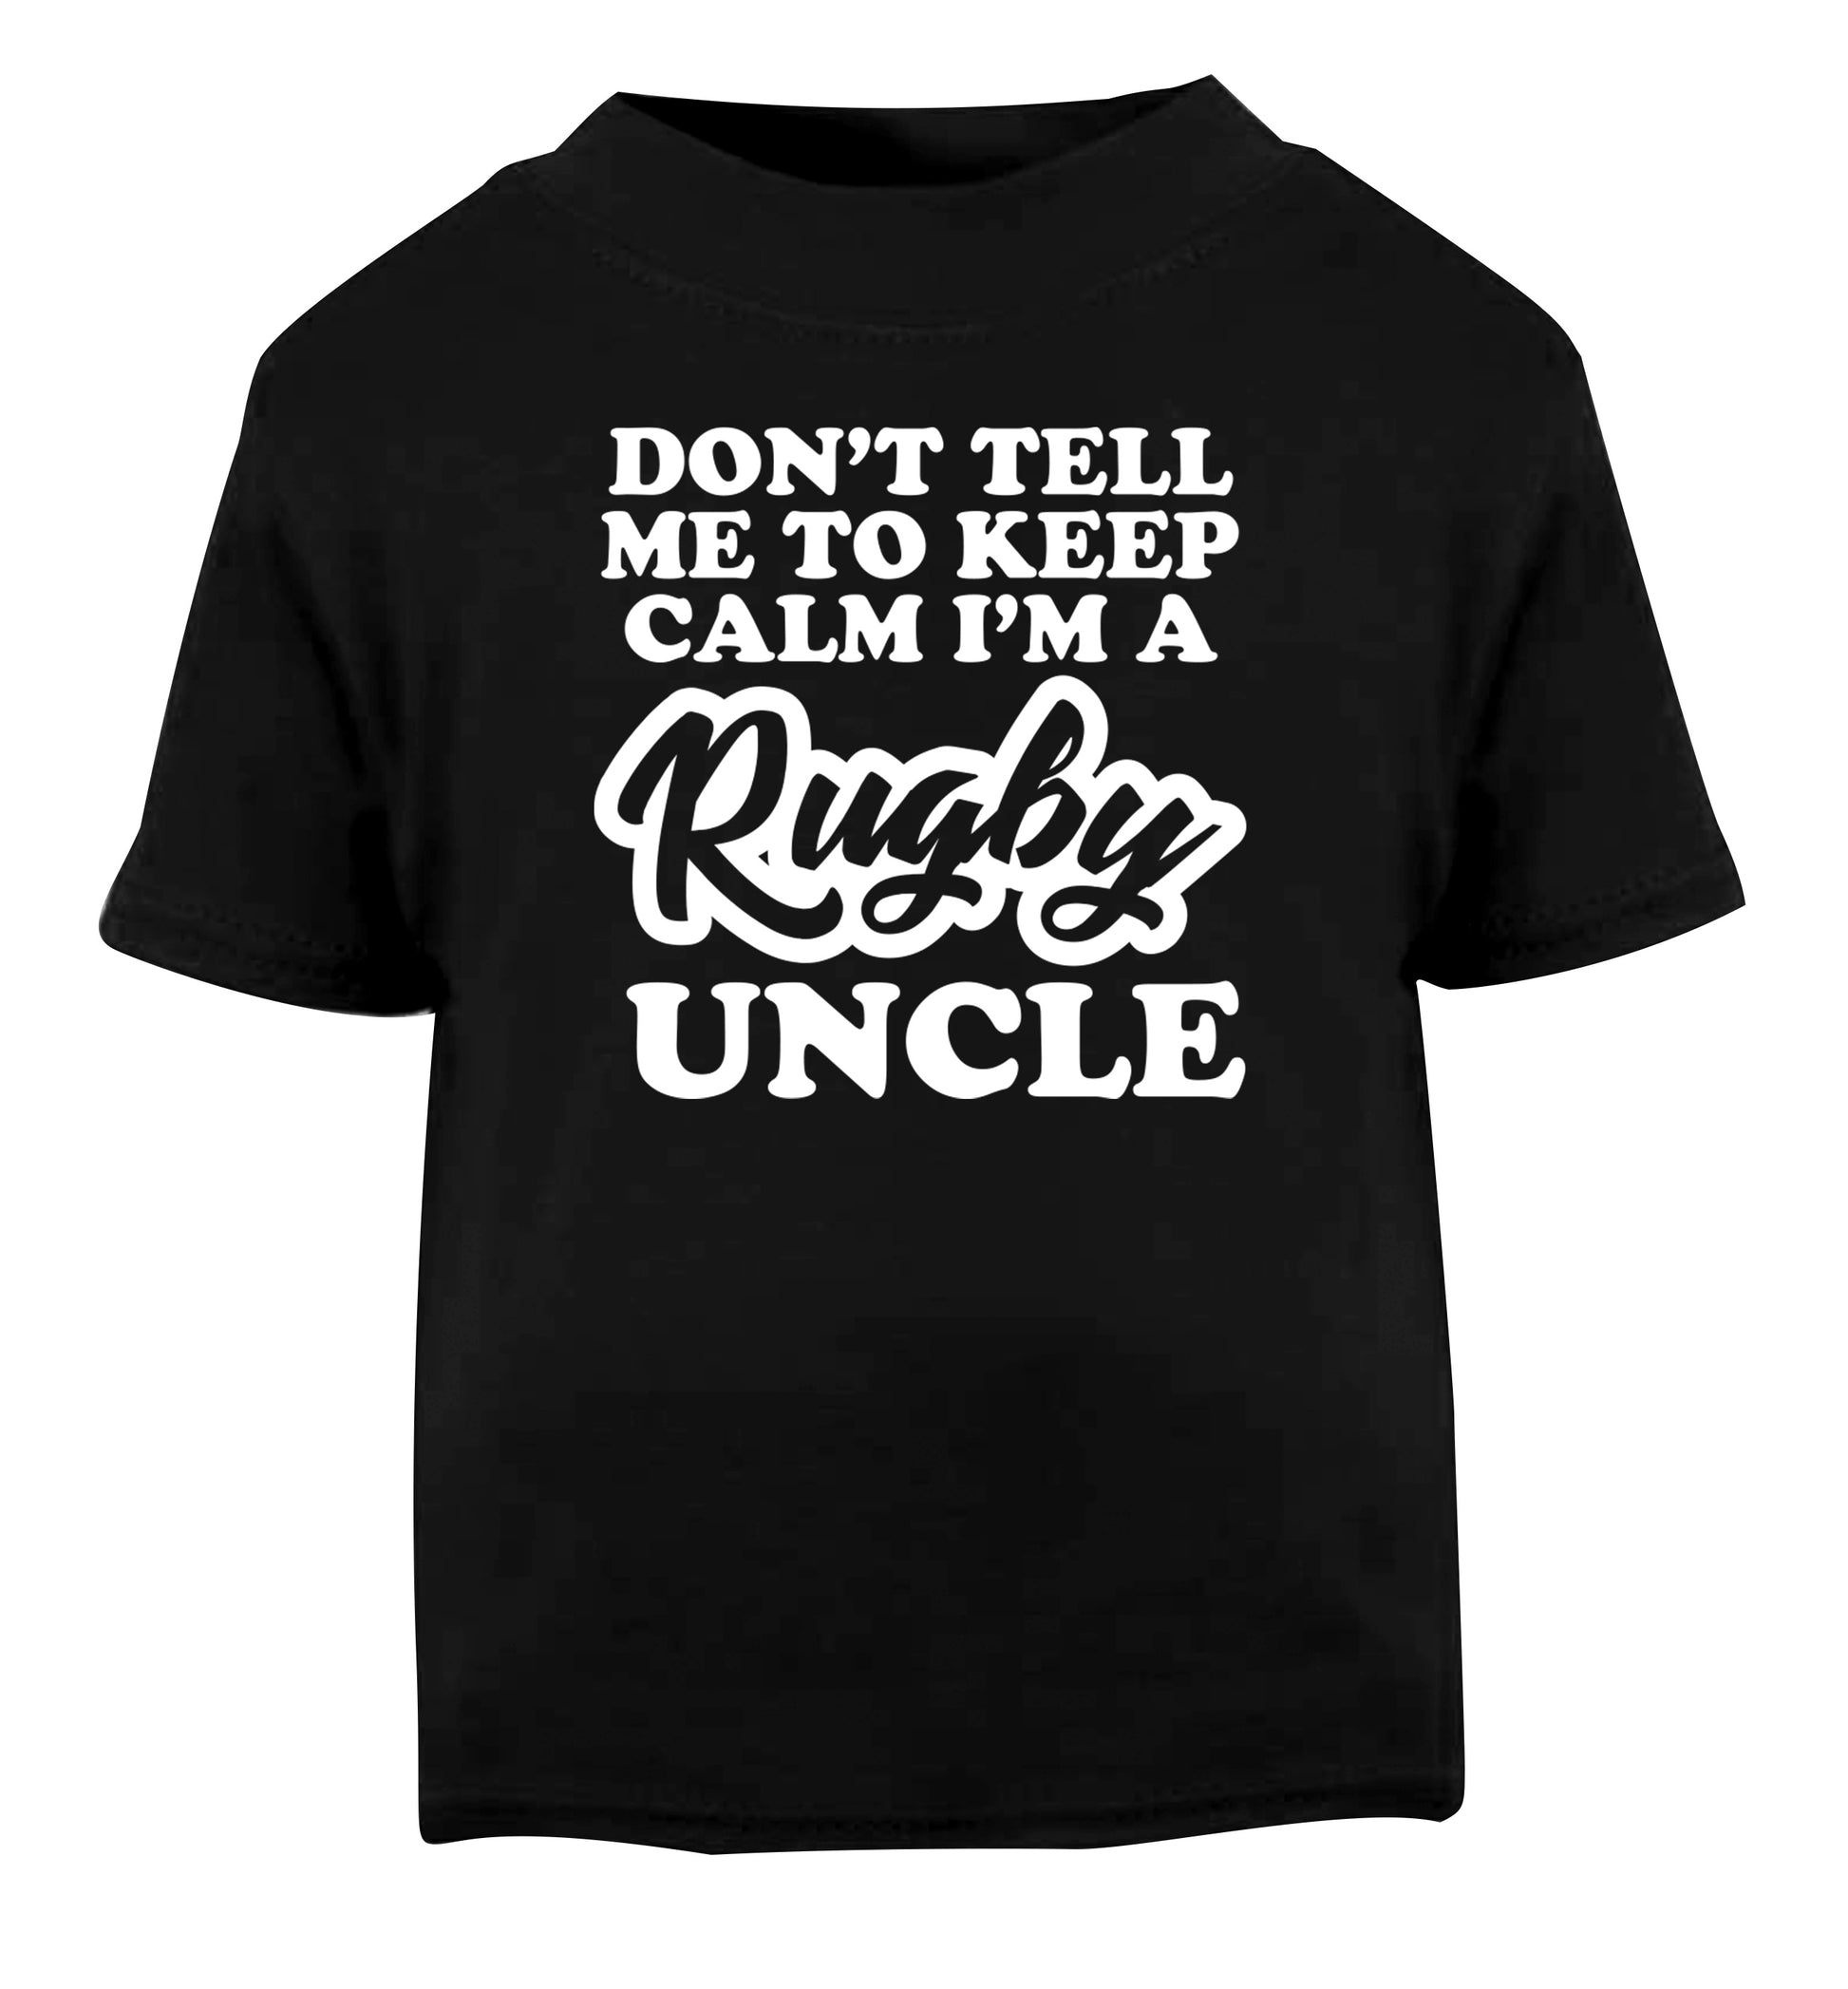 Don't tell me to keep calm I'm a rugby uncle Black Baby Toddler Tshirt 2 years